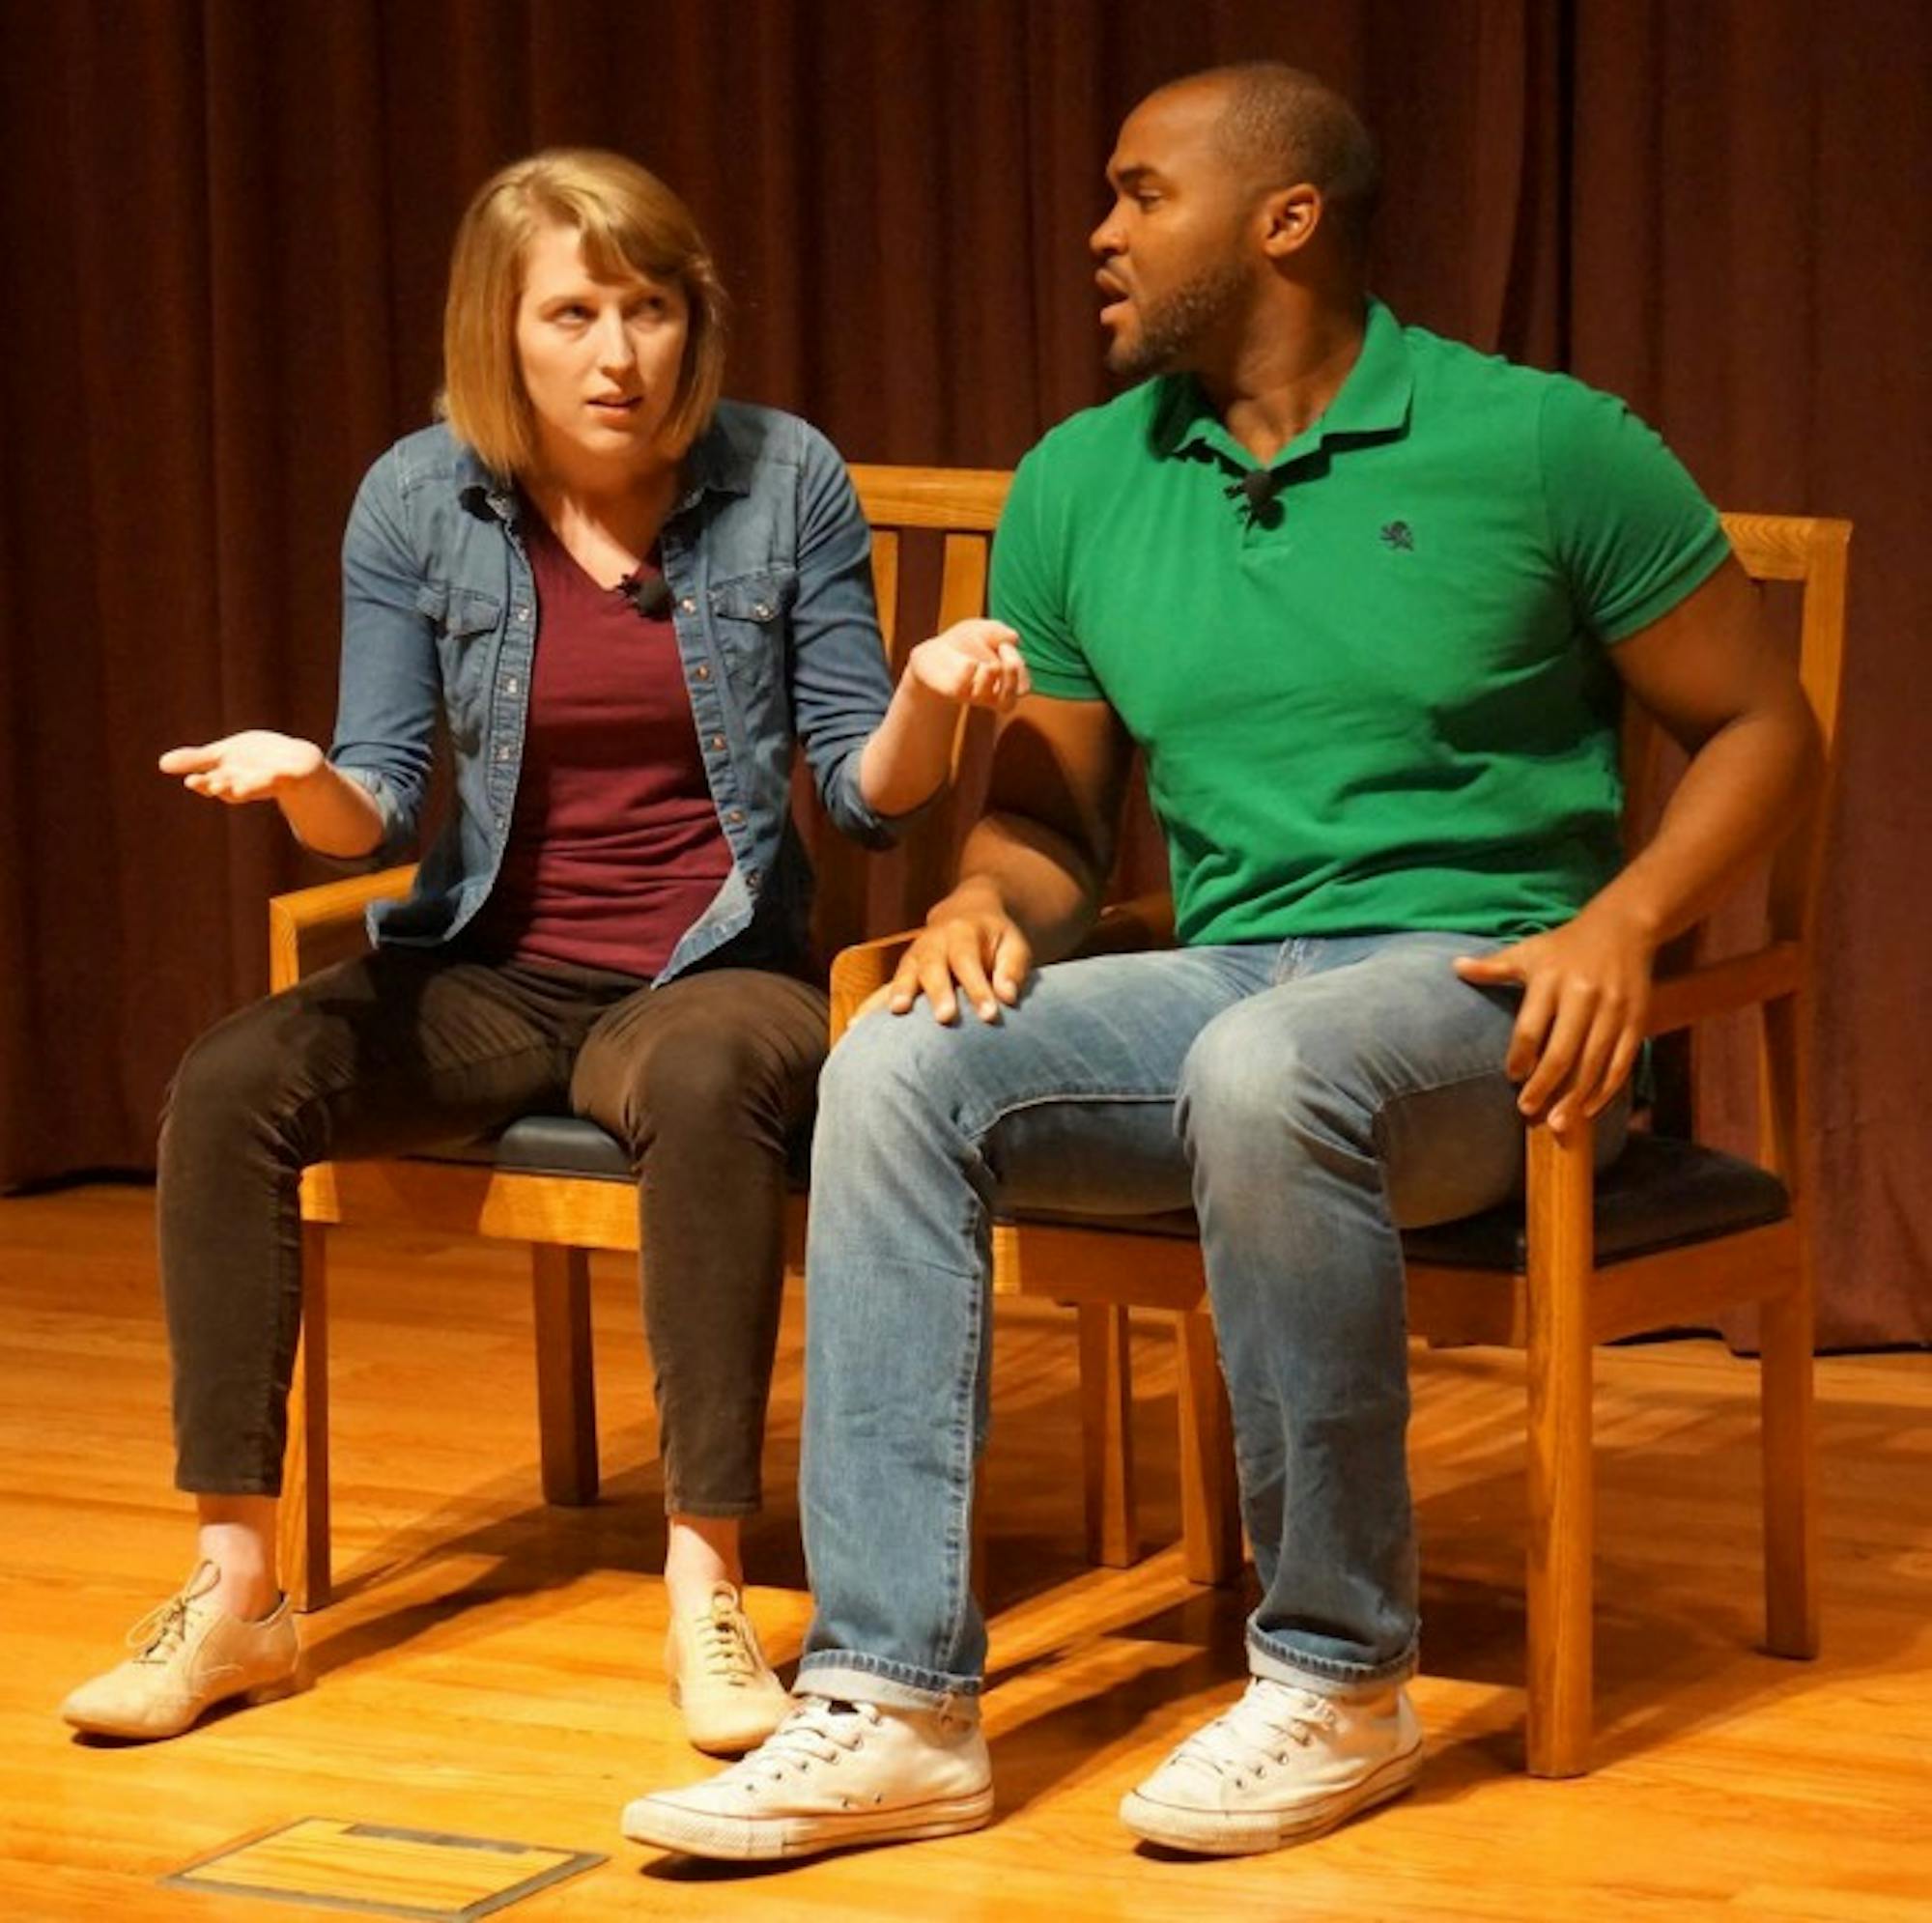 Catharsis Production actors Phillip Sheridan and Anne Dufault use humor to start discussions about sexual assault around campus.